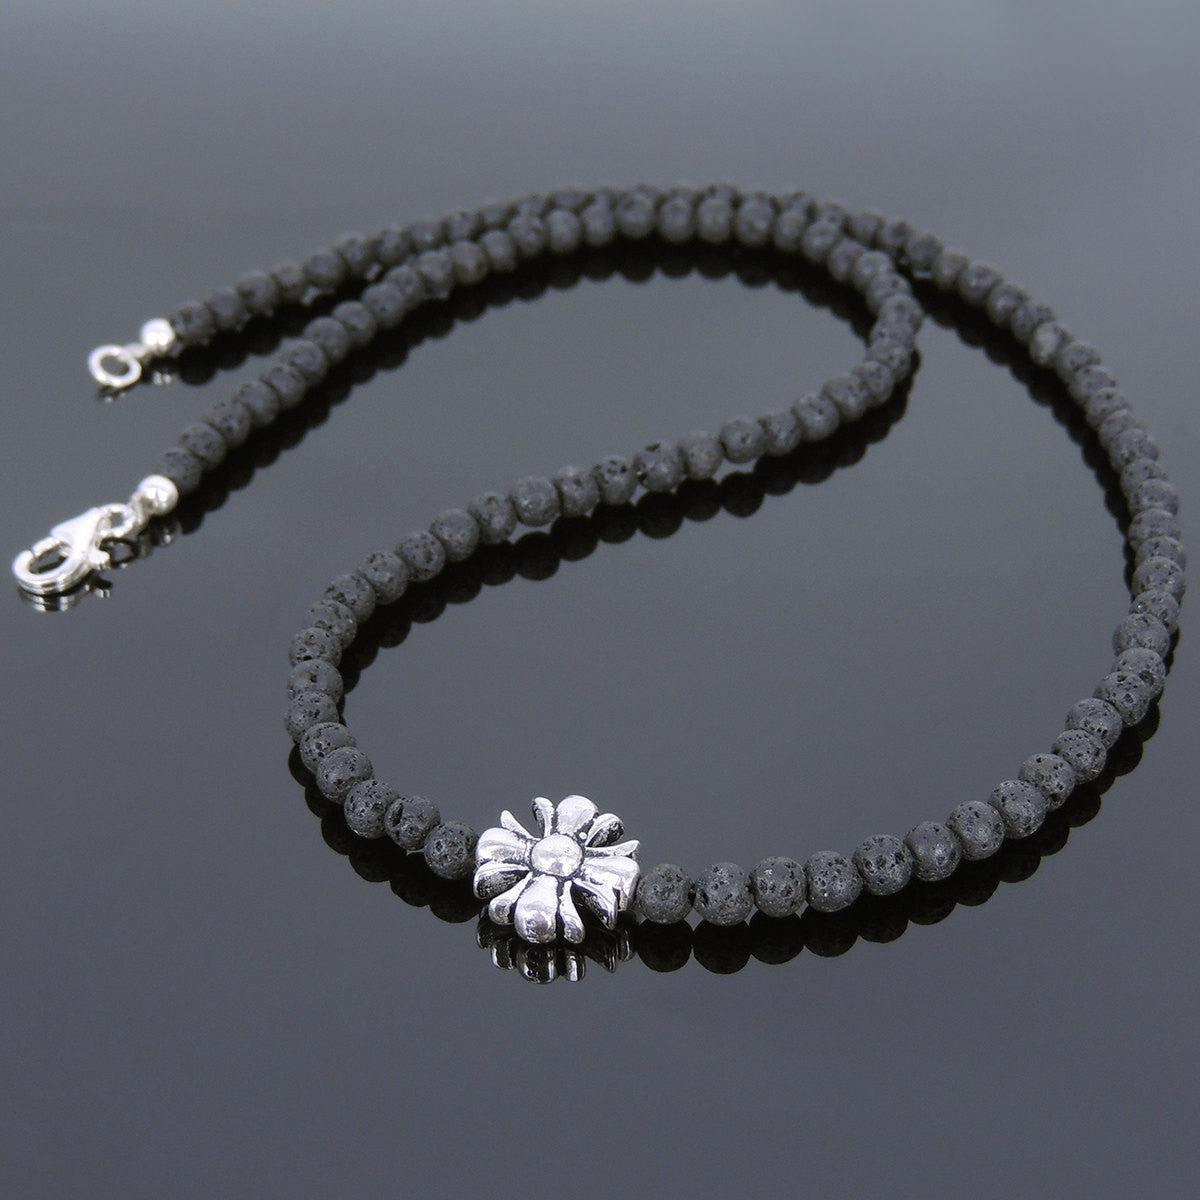 4mm Lava Rock Healing Stone Necklace with S925 Sterling Silver Seamless Beads & Clasp - Handmade by Gem & Silver NK075